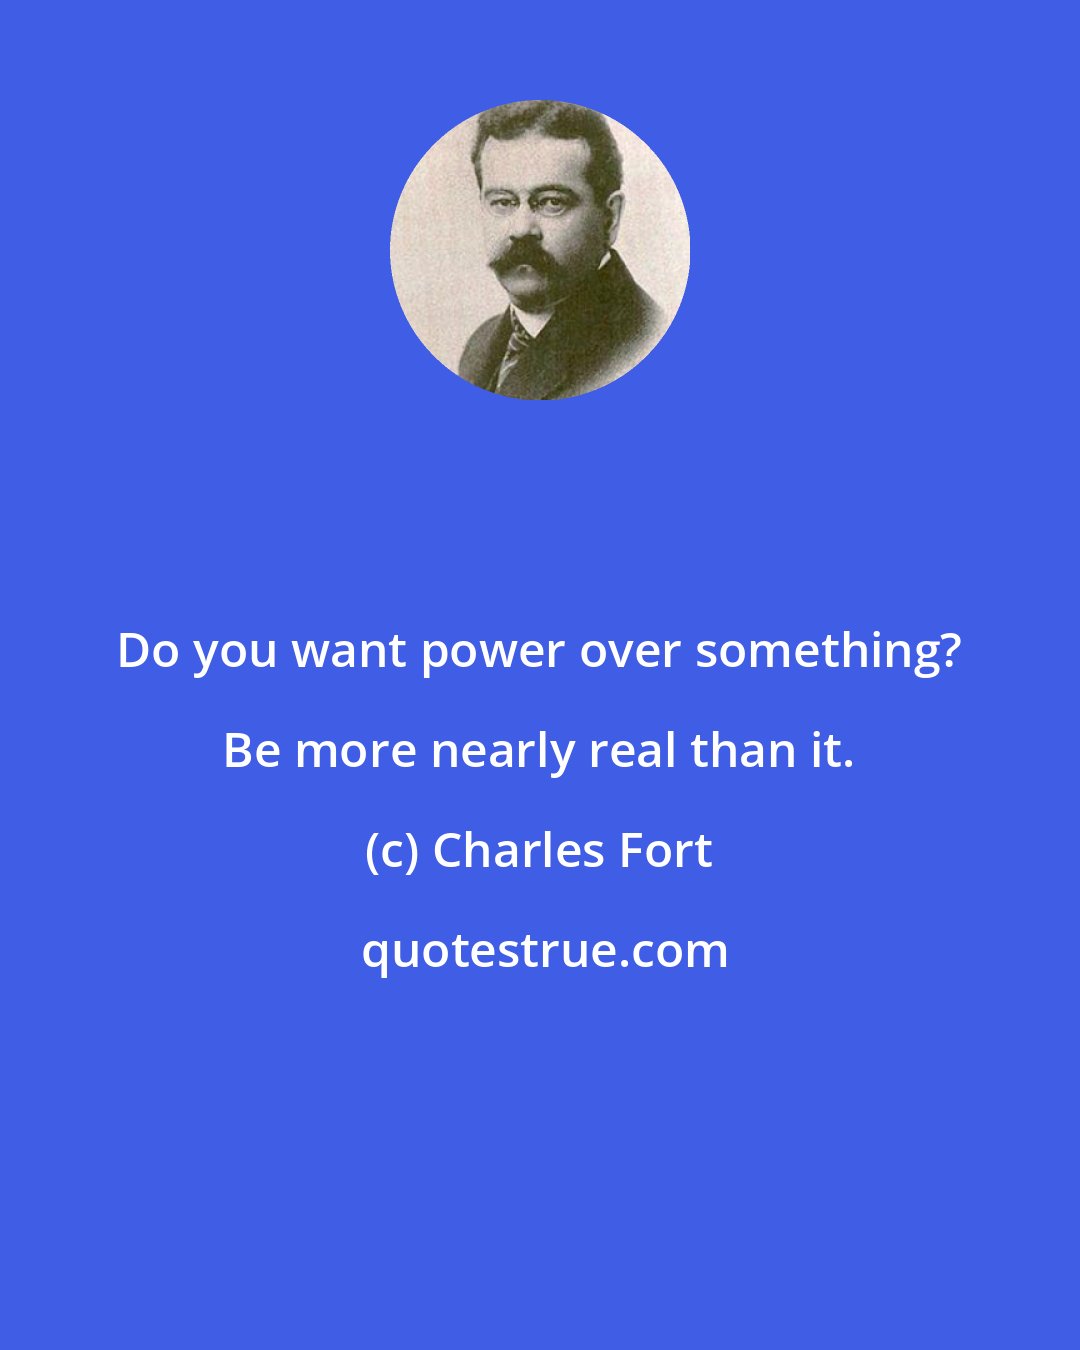 Charles Fort: Do you want power over something? Be more nearly real than it.